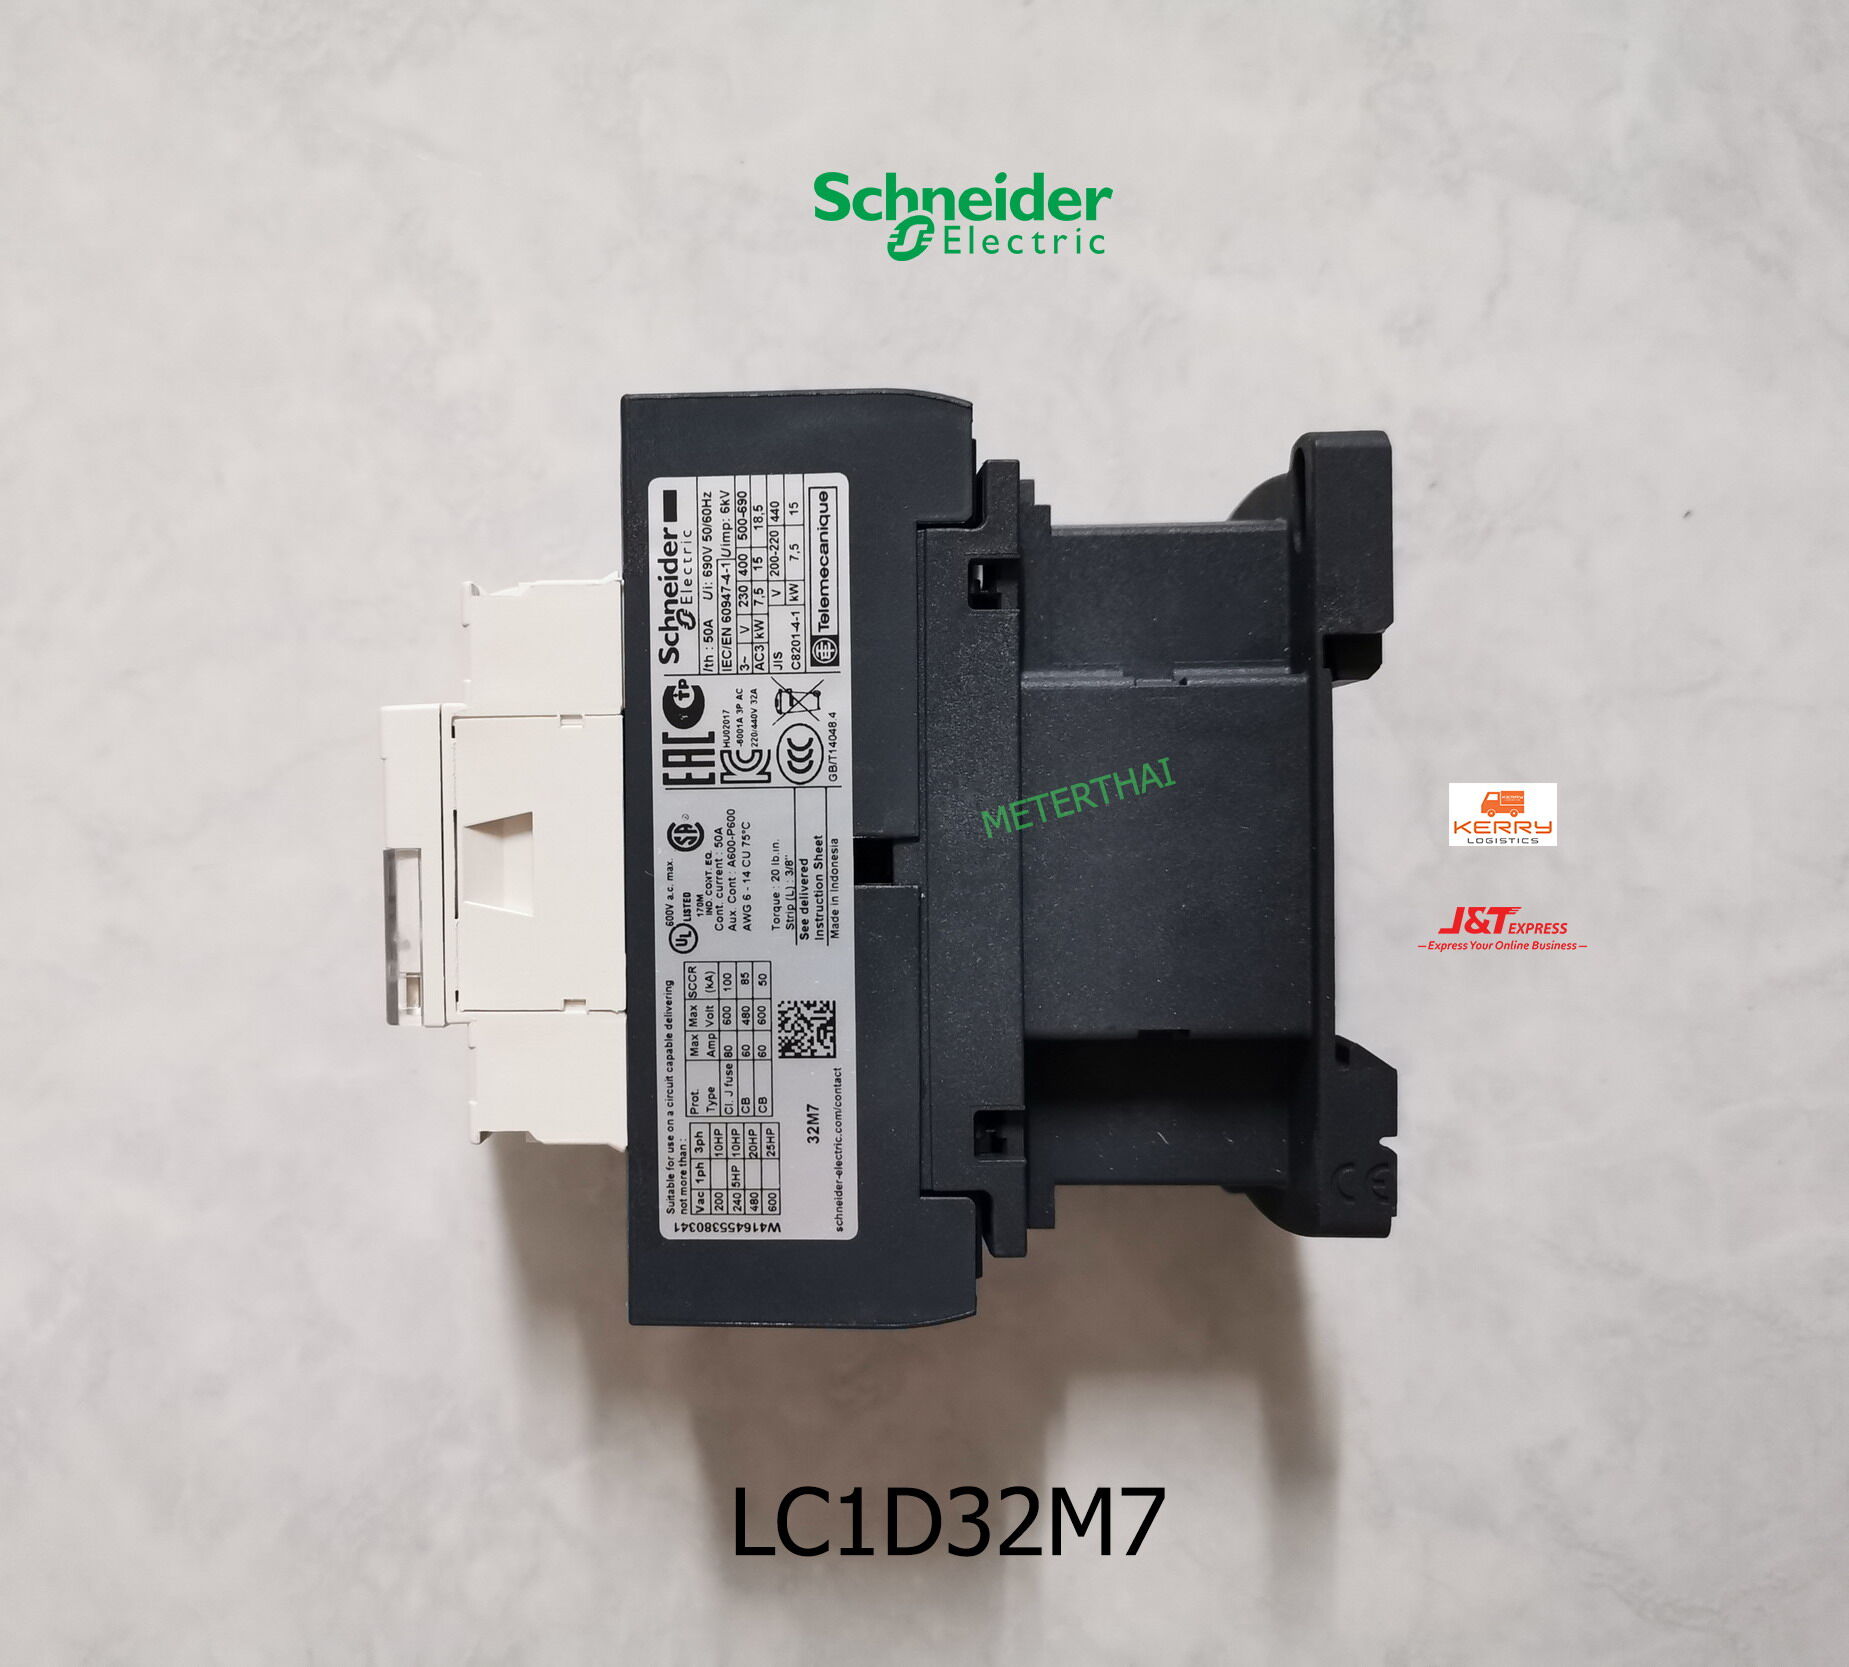 SCHNEIDER ELECTRIC LC1D32M7 IEC Magnetic Contactor,220V Coil,32A